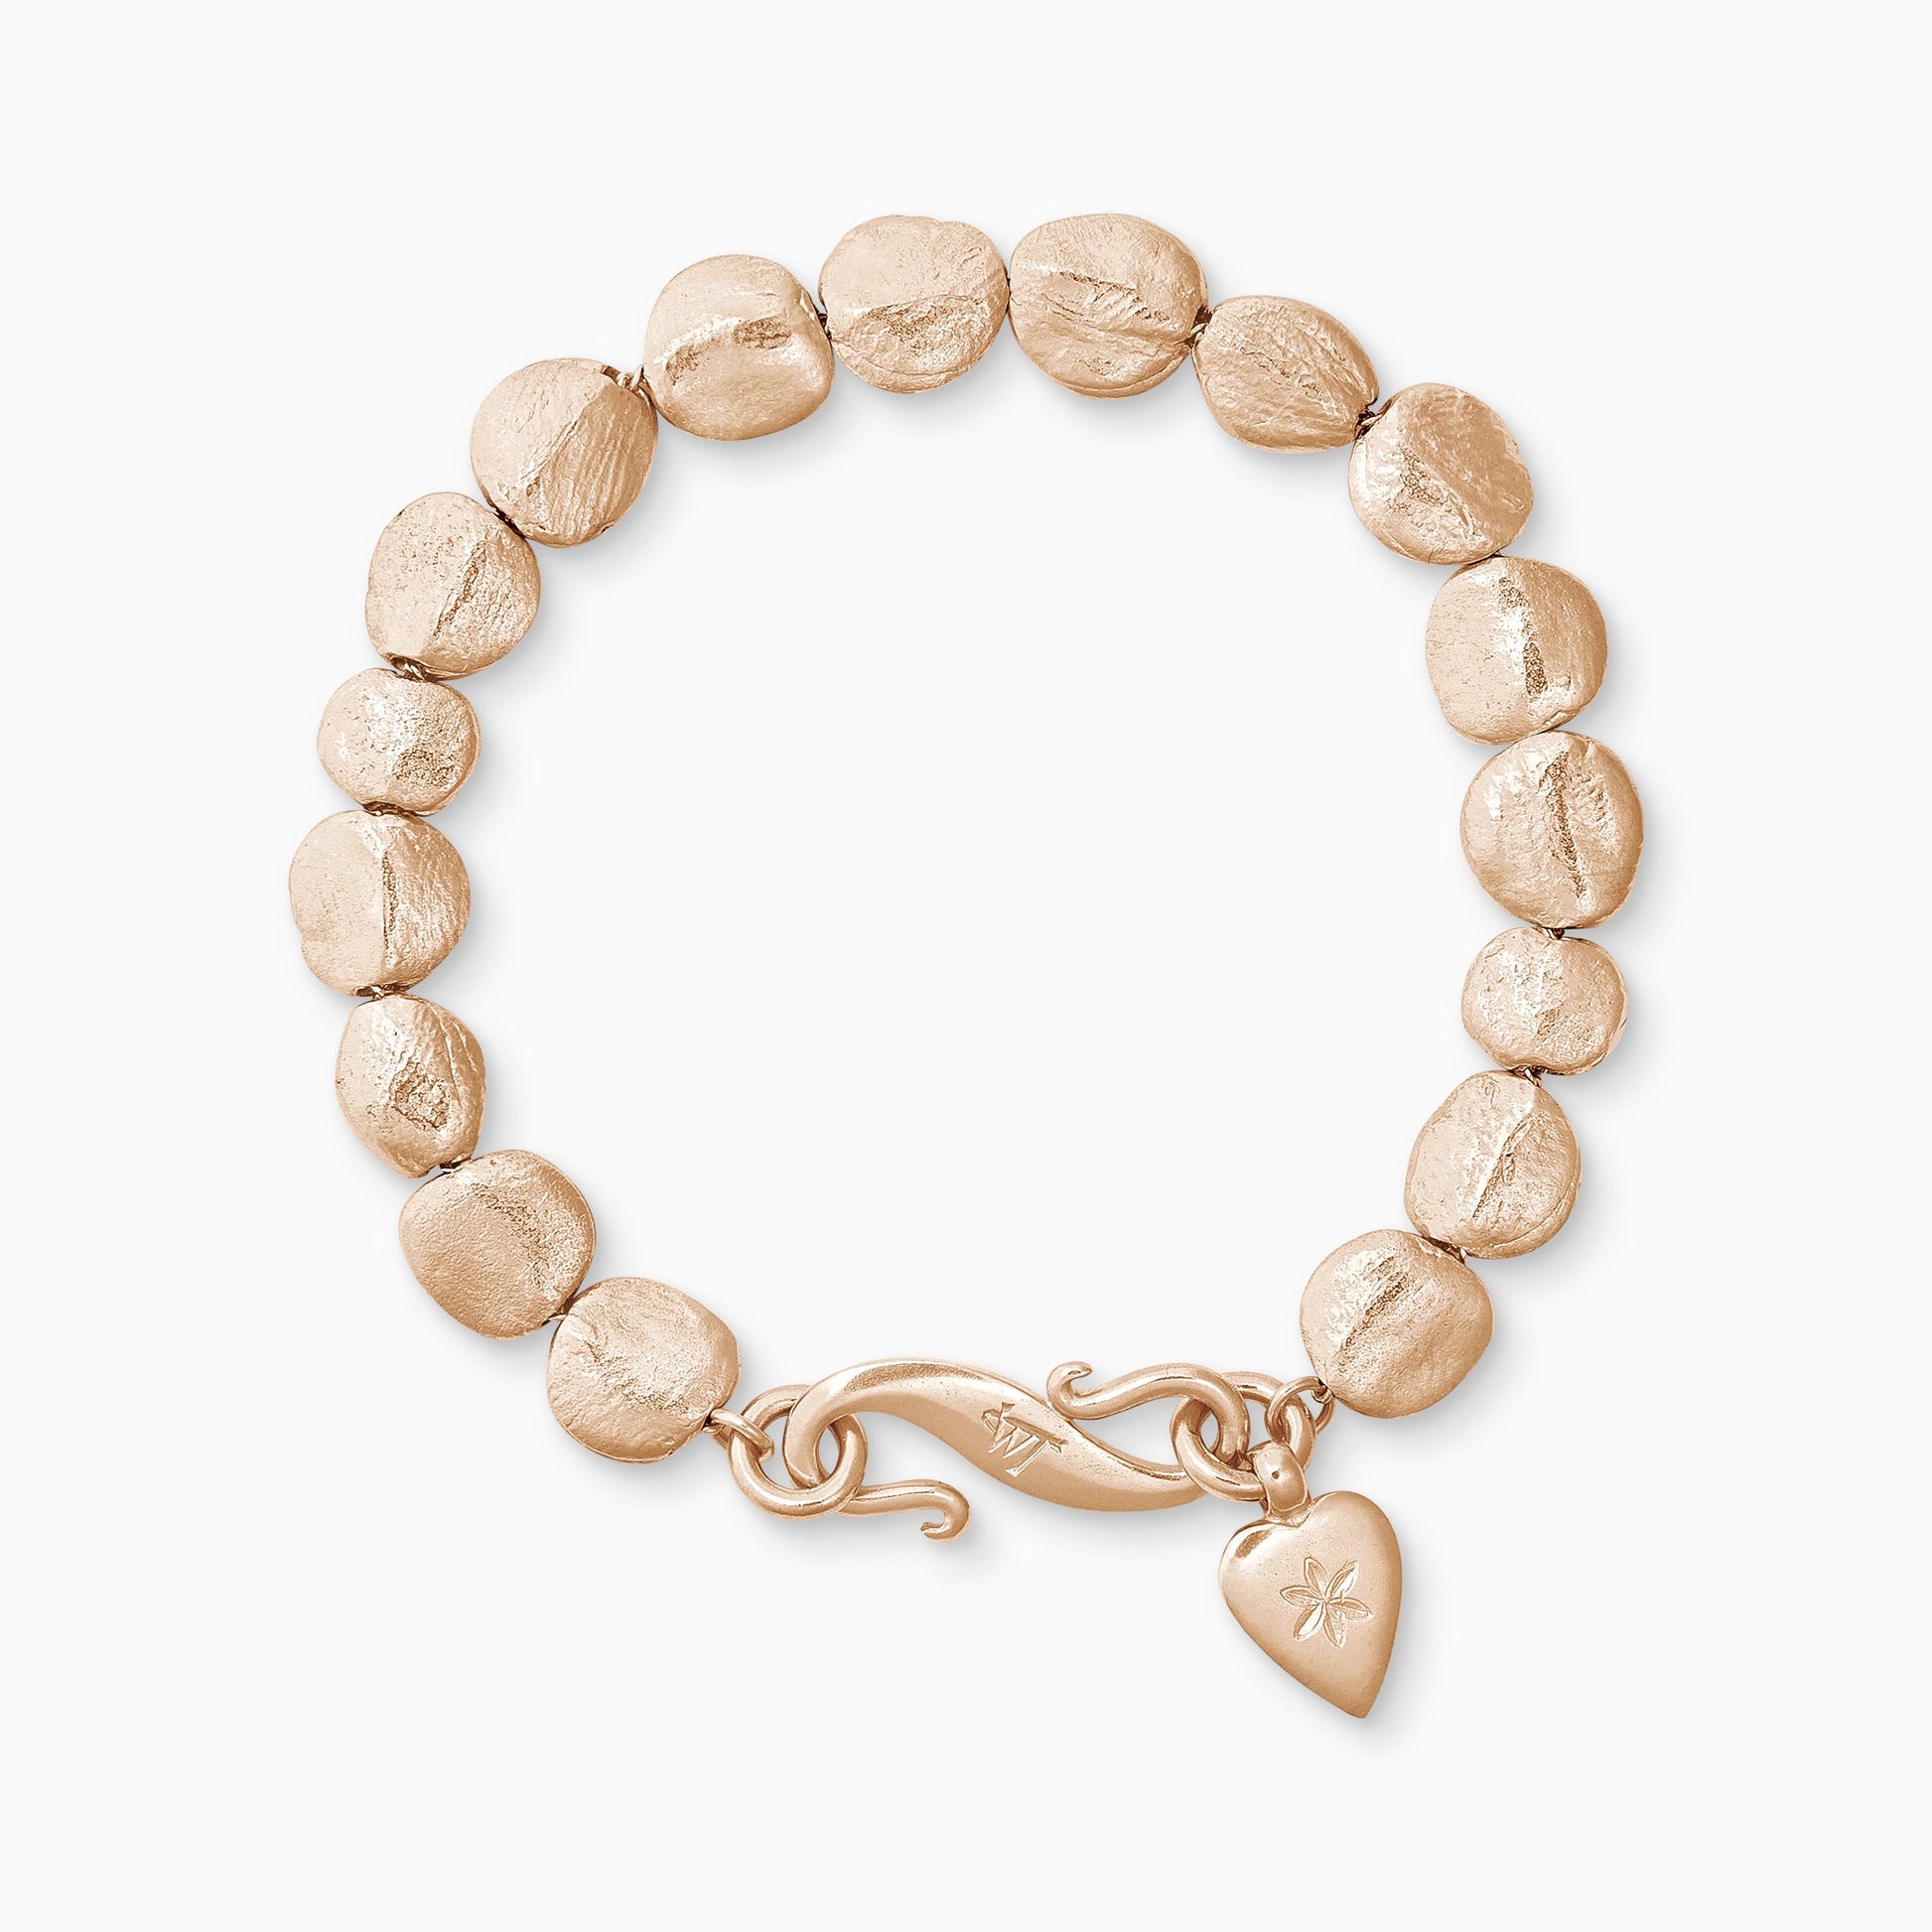 An 18ct Fairtrade rose gold bracelet of handmade textured beads with a smooth heart shaped charm engraved with a 6 petal flower and our signature ’S’ clasp. Bracelet length 190mm. Beads varying from approximately 7mm x 4mm to 10mm x 11mm